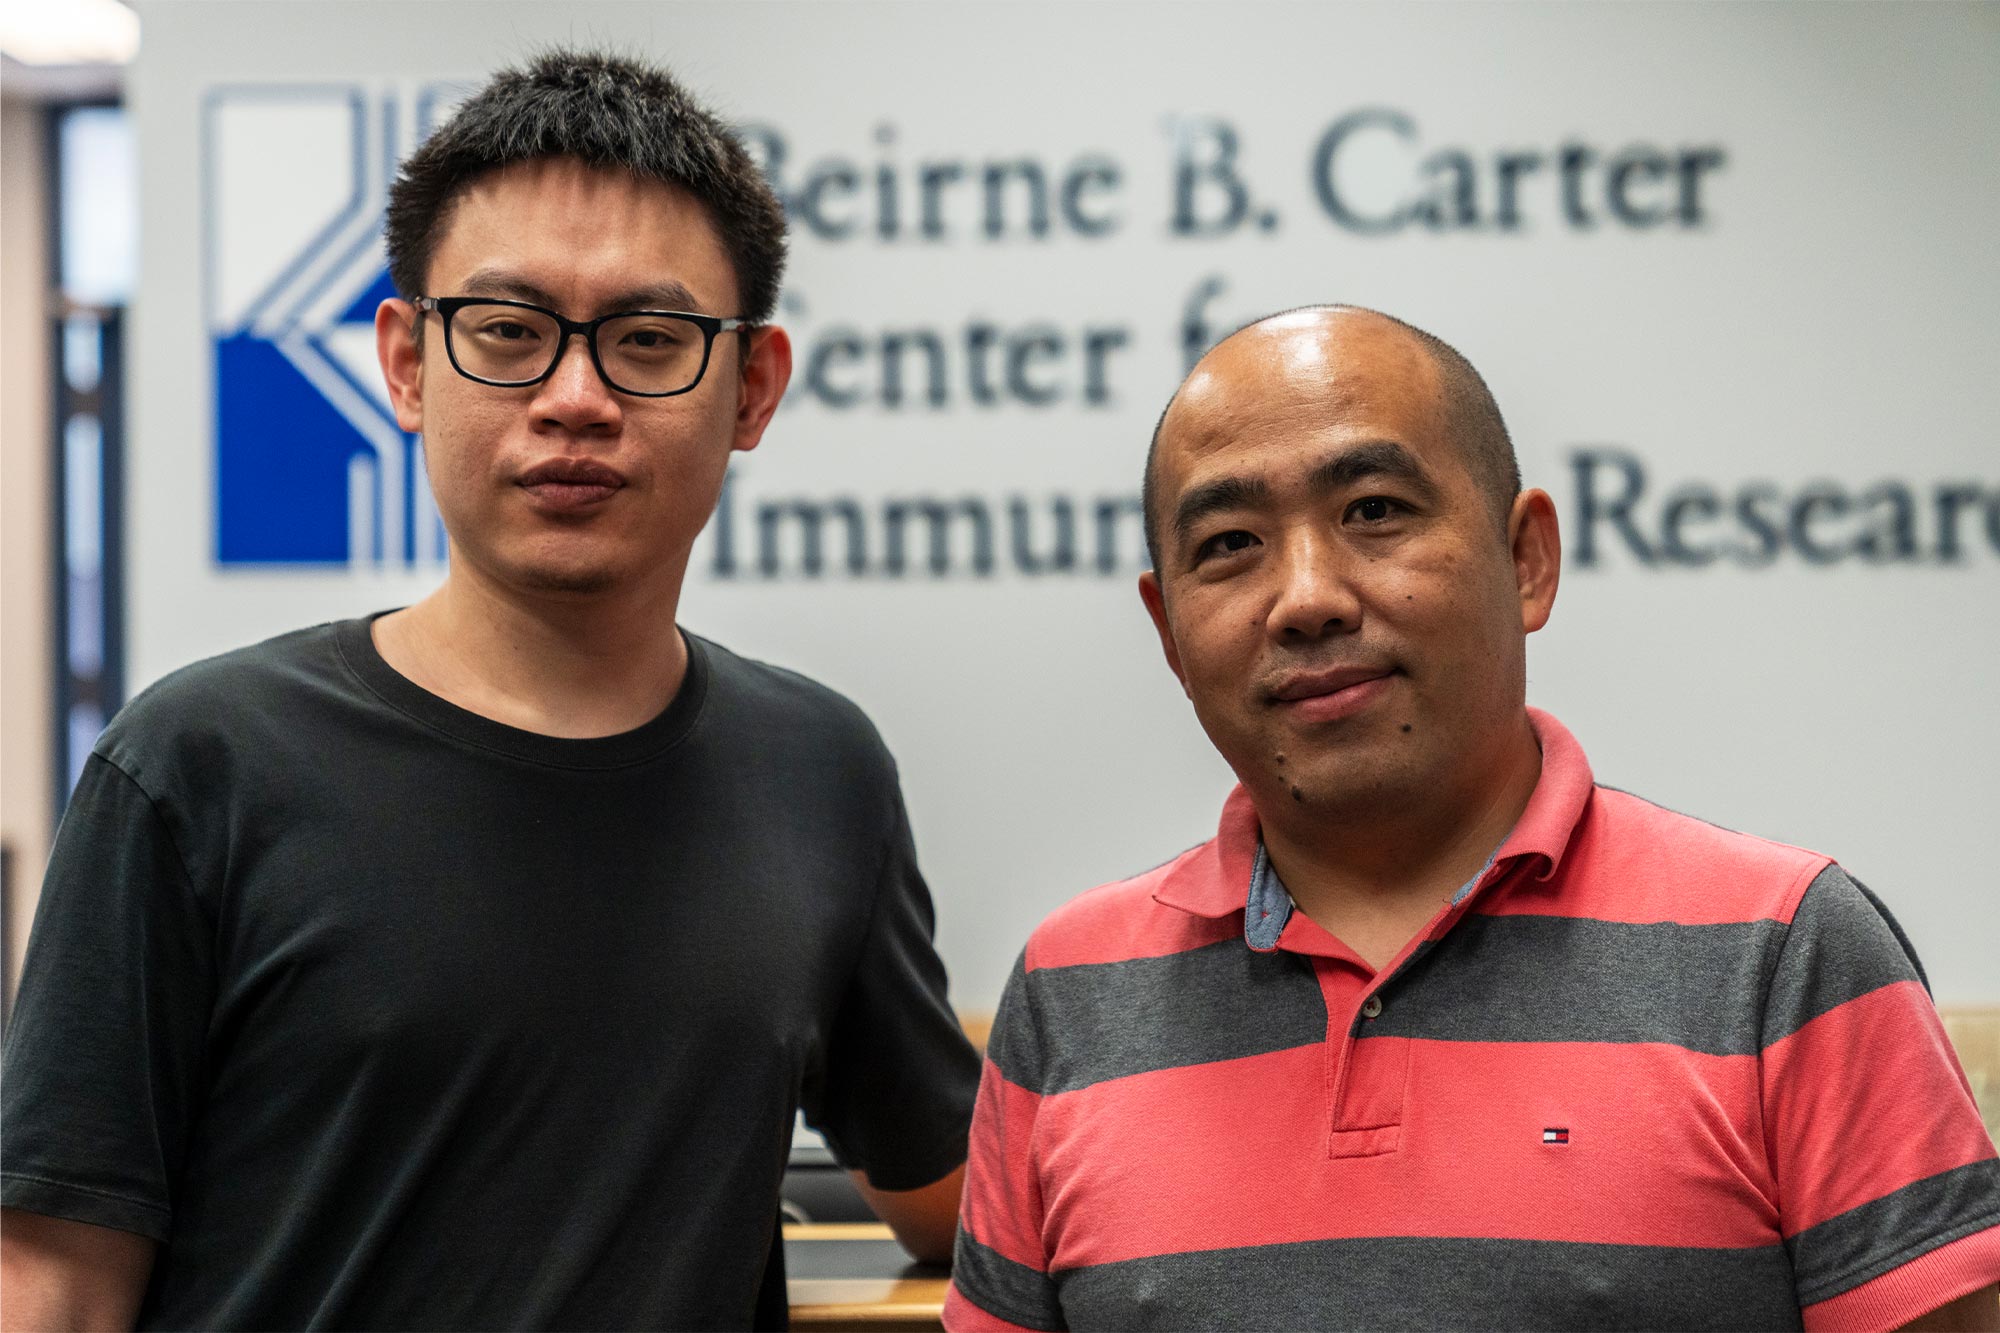 Tang and Sun stand next to each other looking at the camera in front of a sign that reads "Beirne B. Carter Center for Immunology Research"